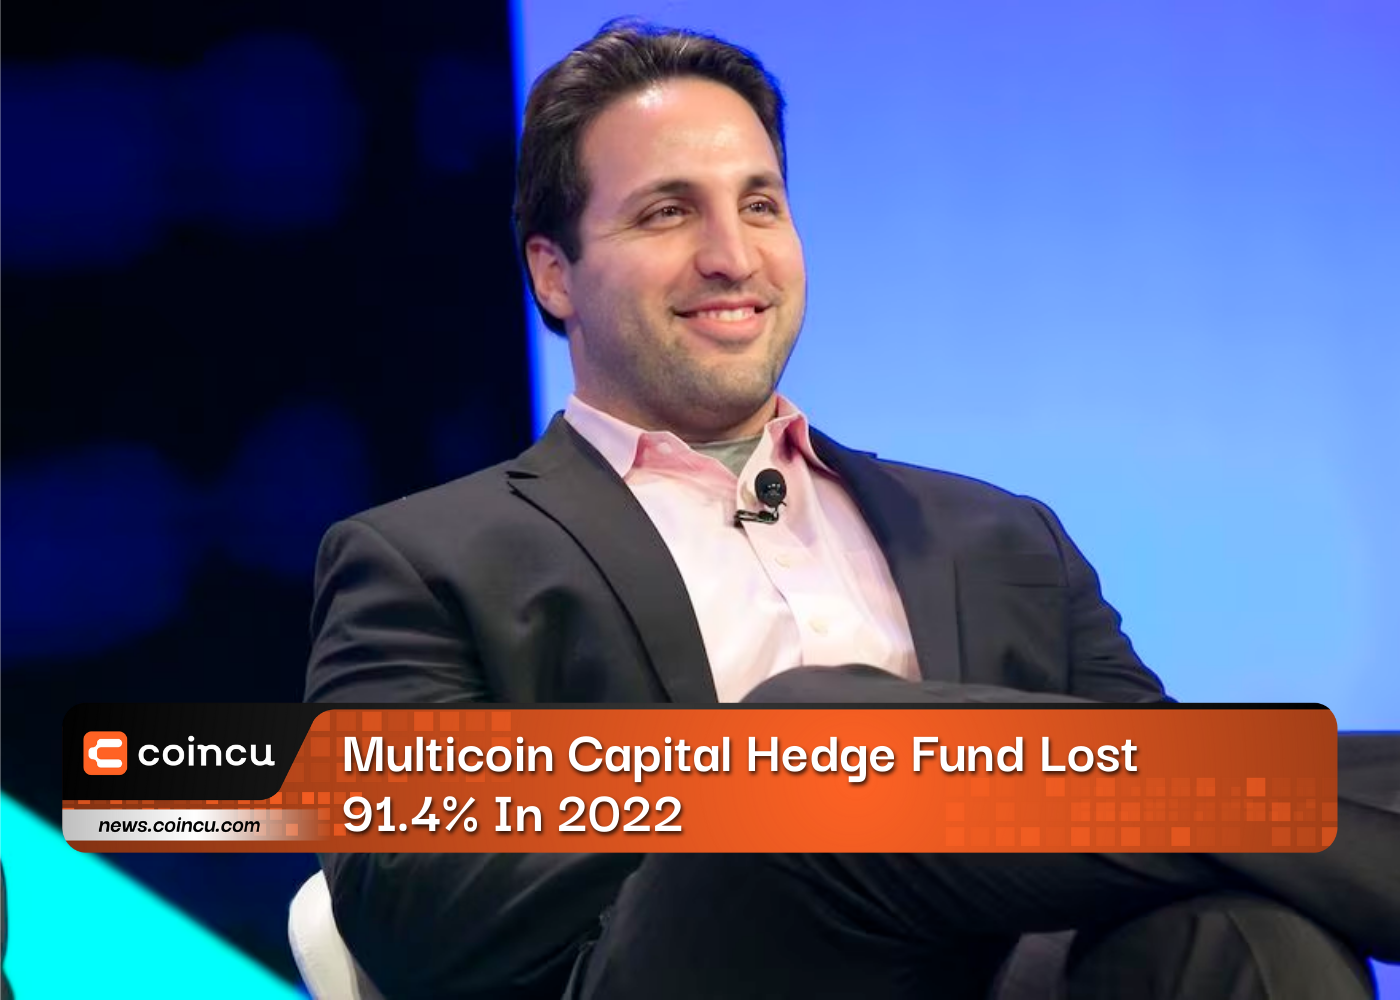 Multicoin Capital Hedge Fund Lost 91.4% In 2022